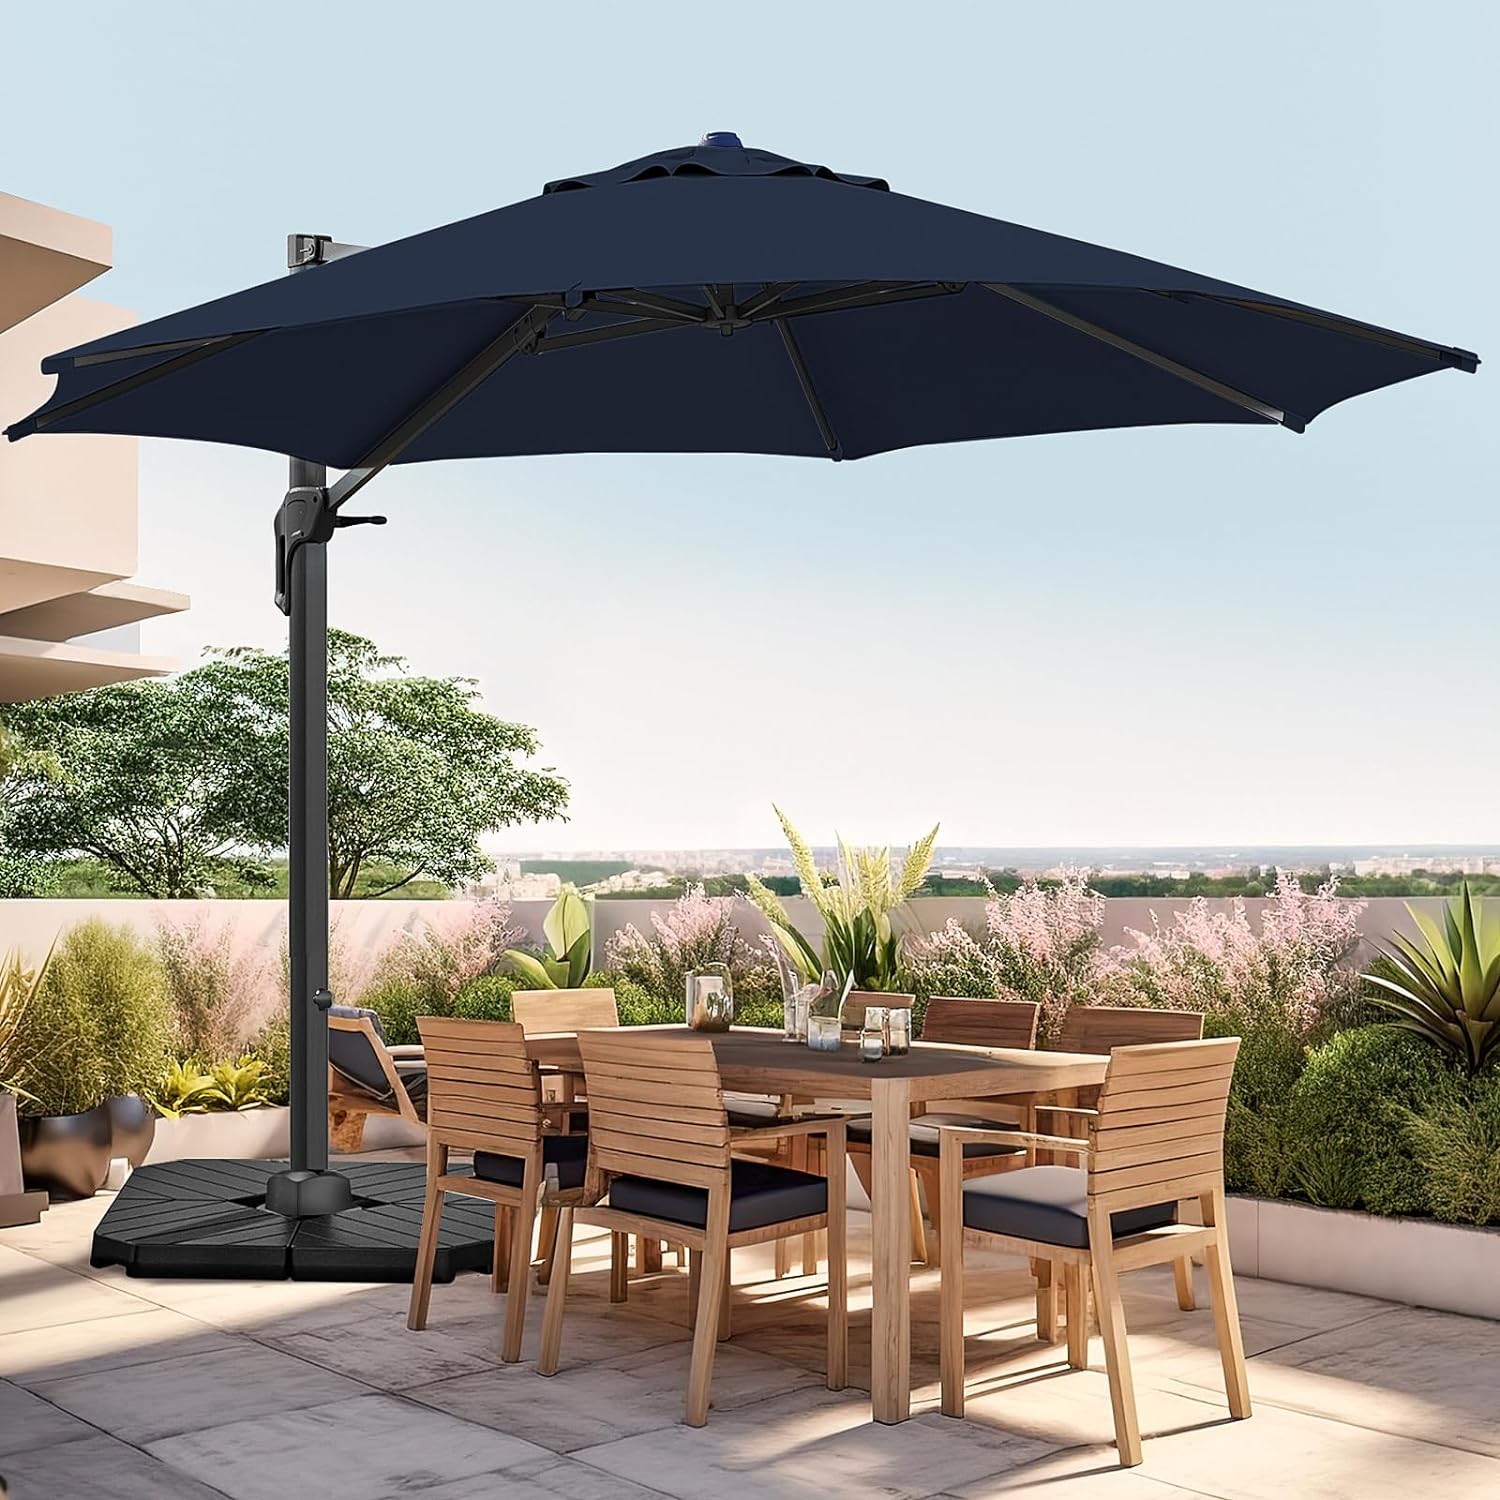 wikiwiki 11 FT Cantilever Patio Umbrellas Outdoor Offset Umbrella w/ 36 Month Fade Resistance Recycled Fabric, 6-Level 360Rotation Aluminum Pole for Deck Pool Garden, Navy Blue